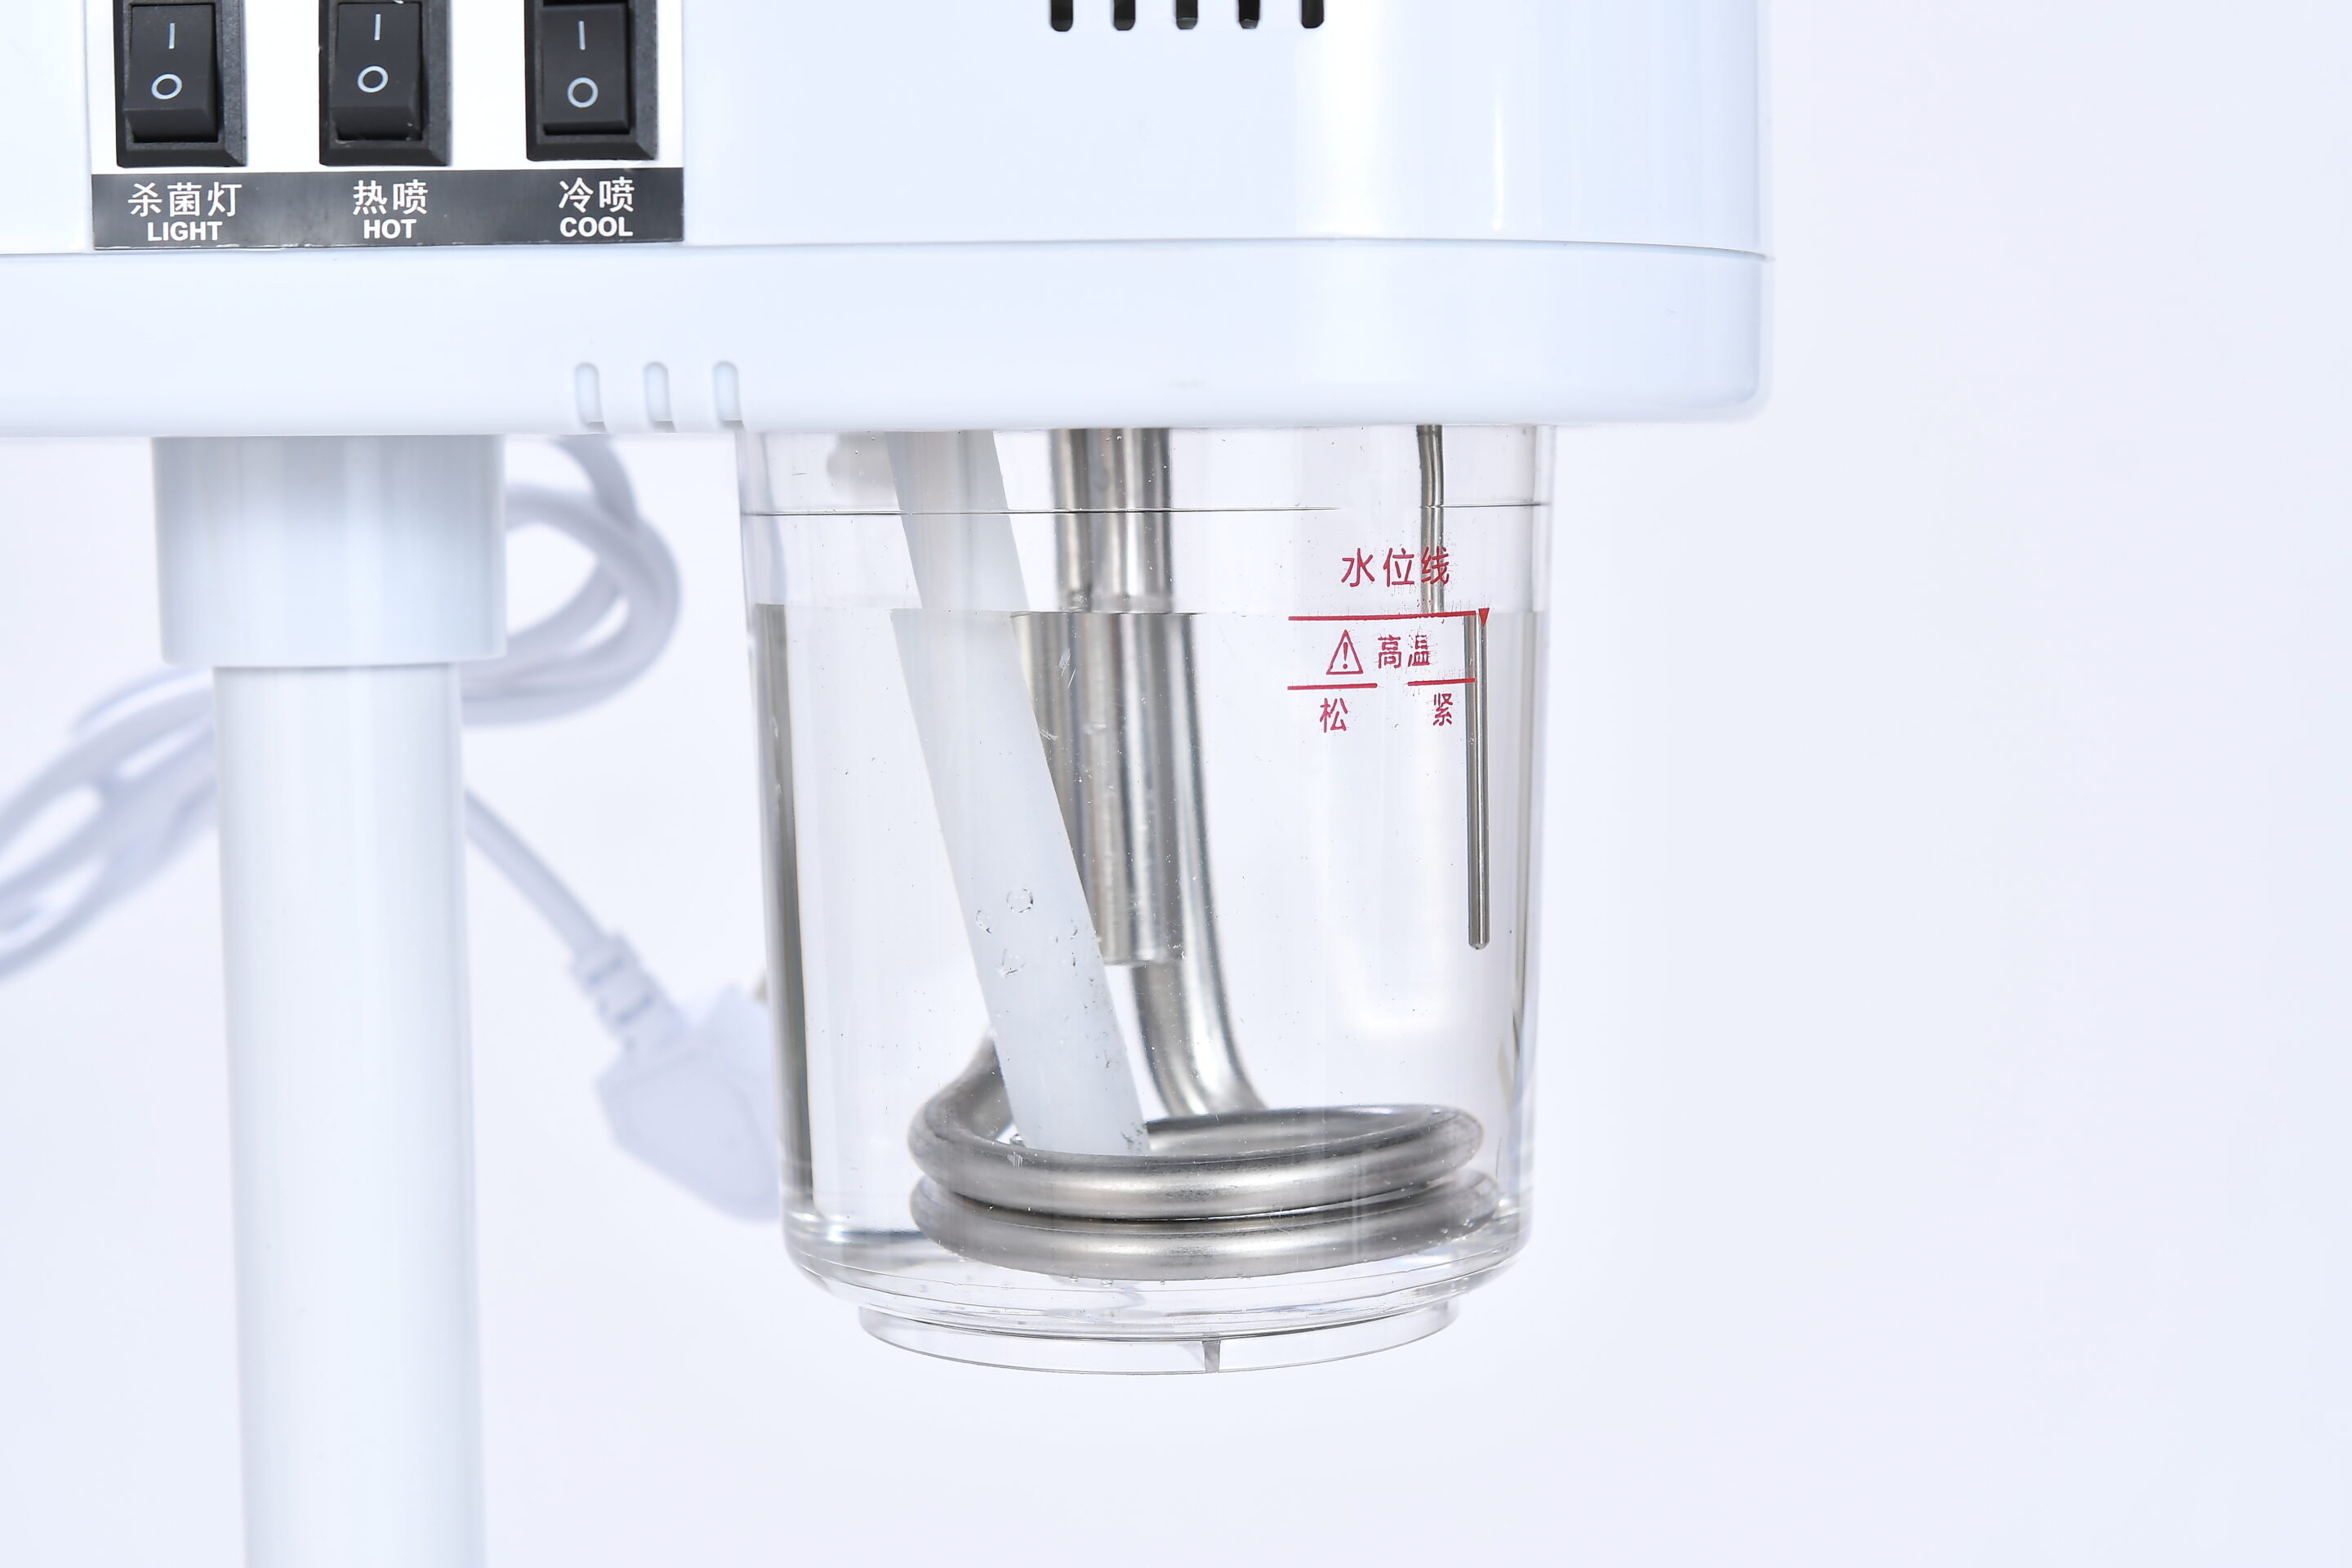 3 in 1 Multifunctional Cold & Heat Facial Steamer with Magnifying lamp